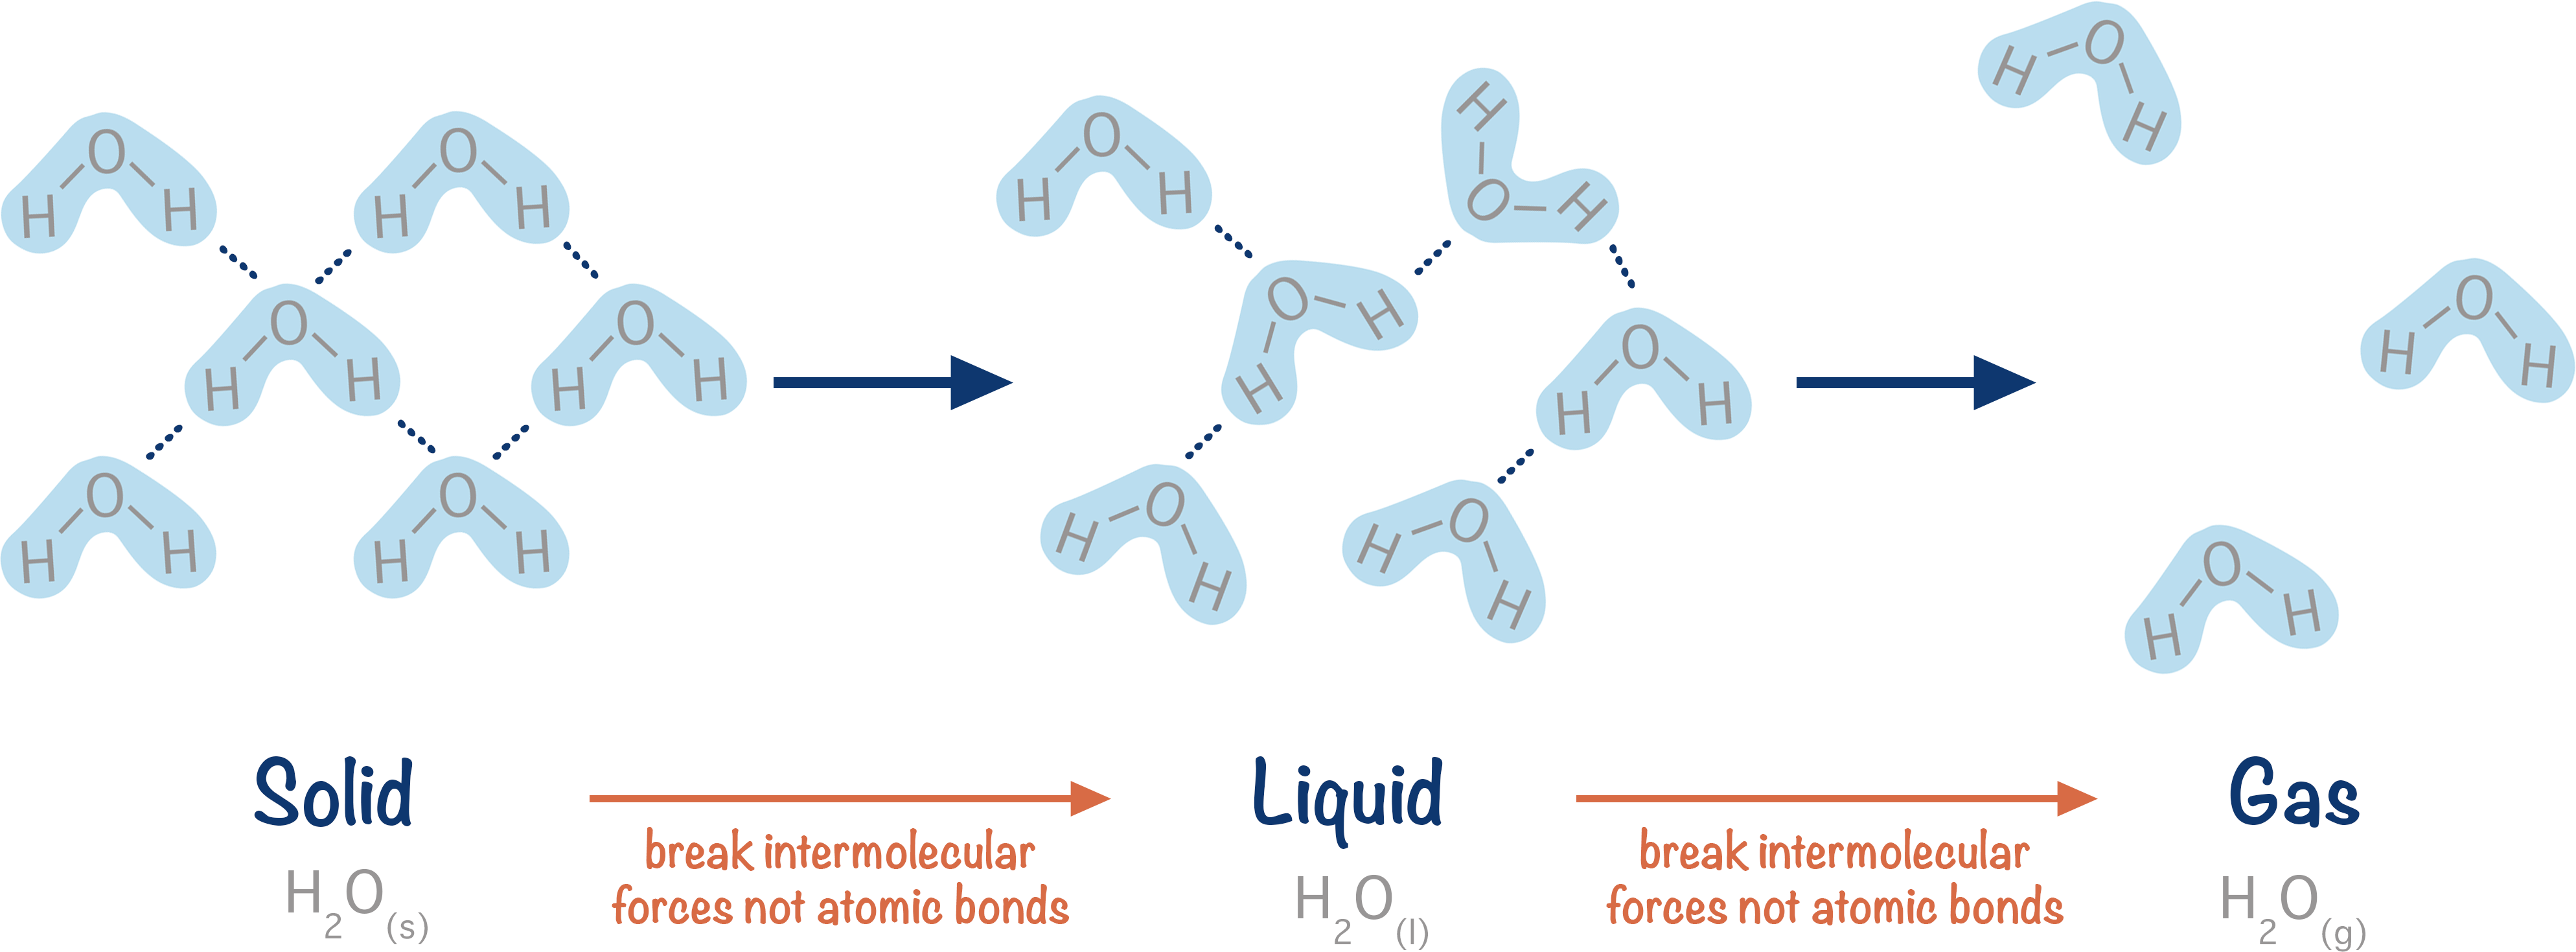 changing of intermolecular forces when water changes state